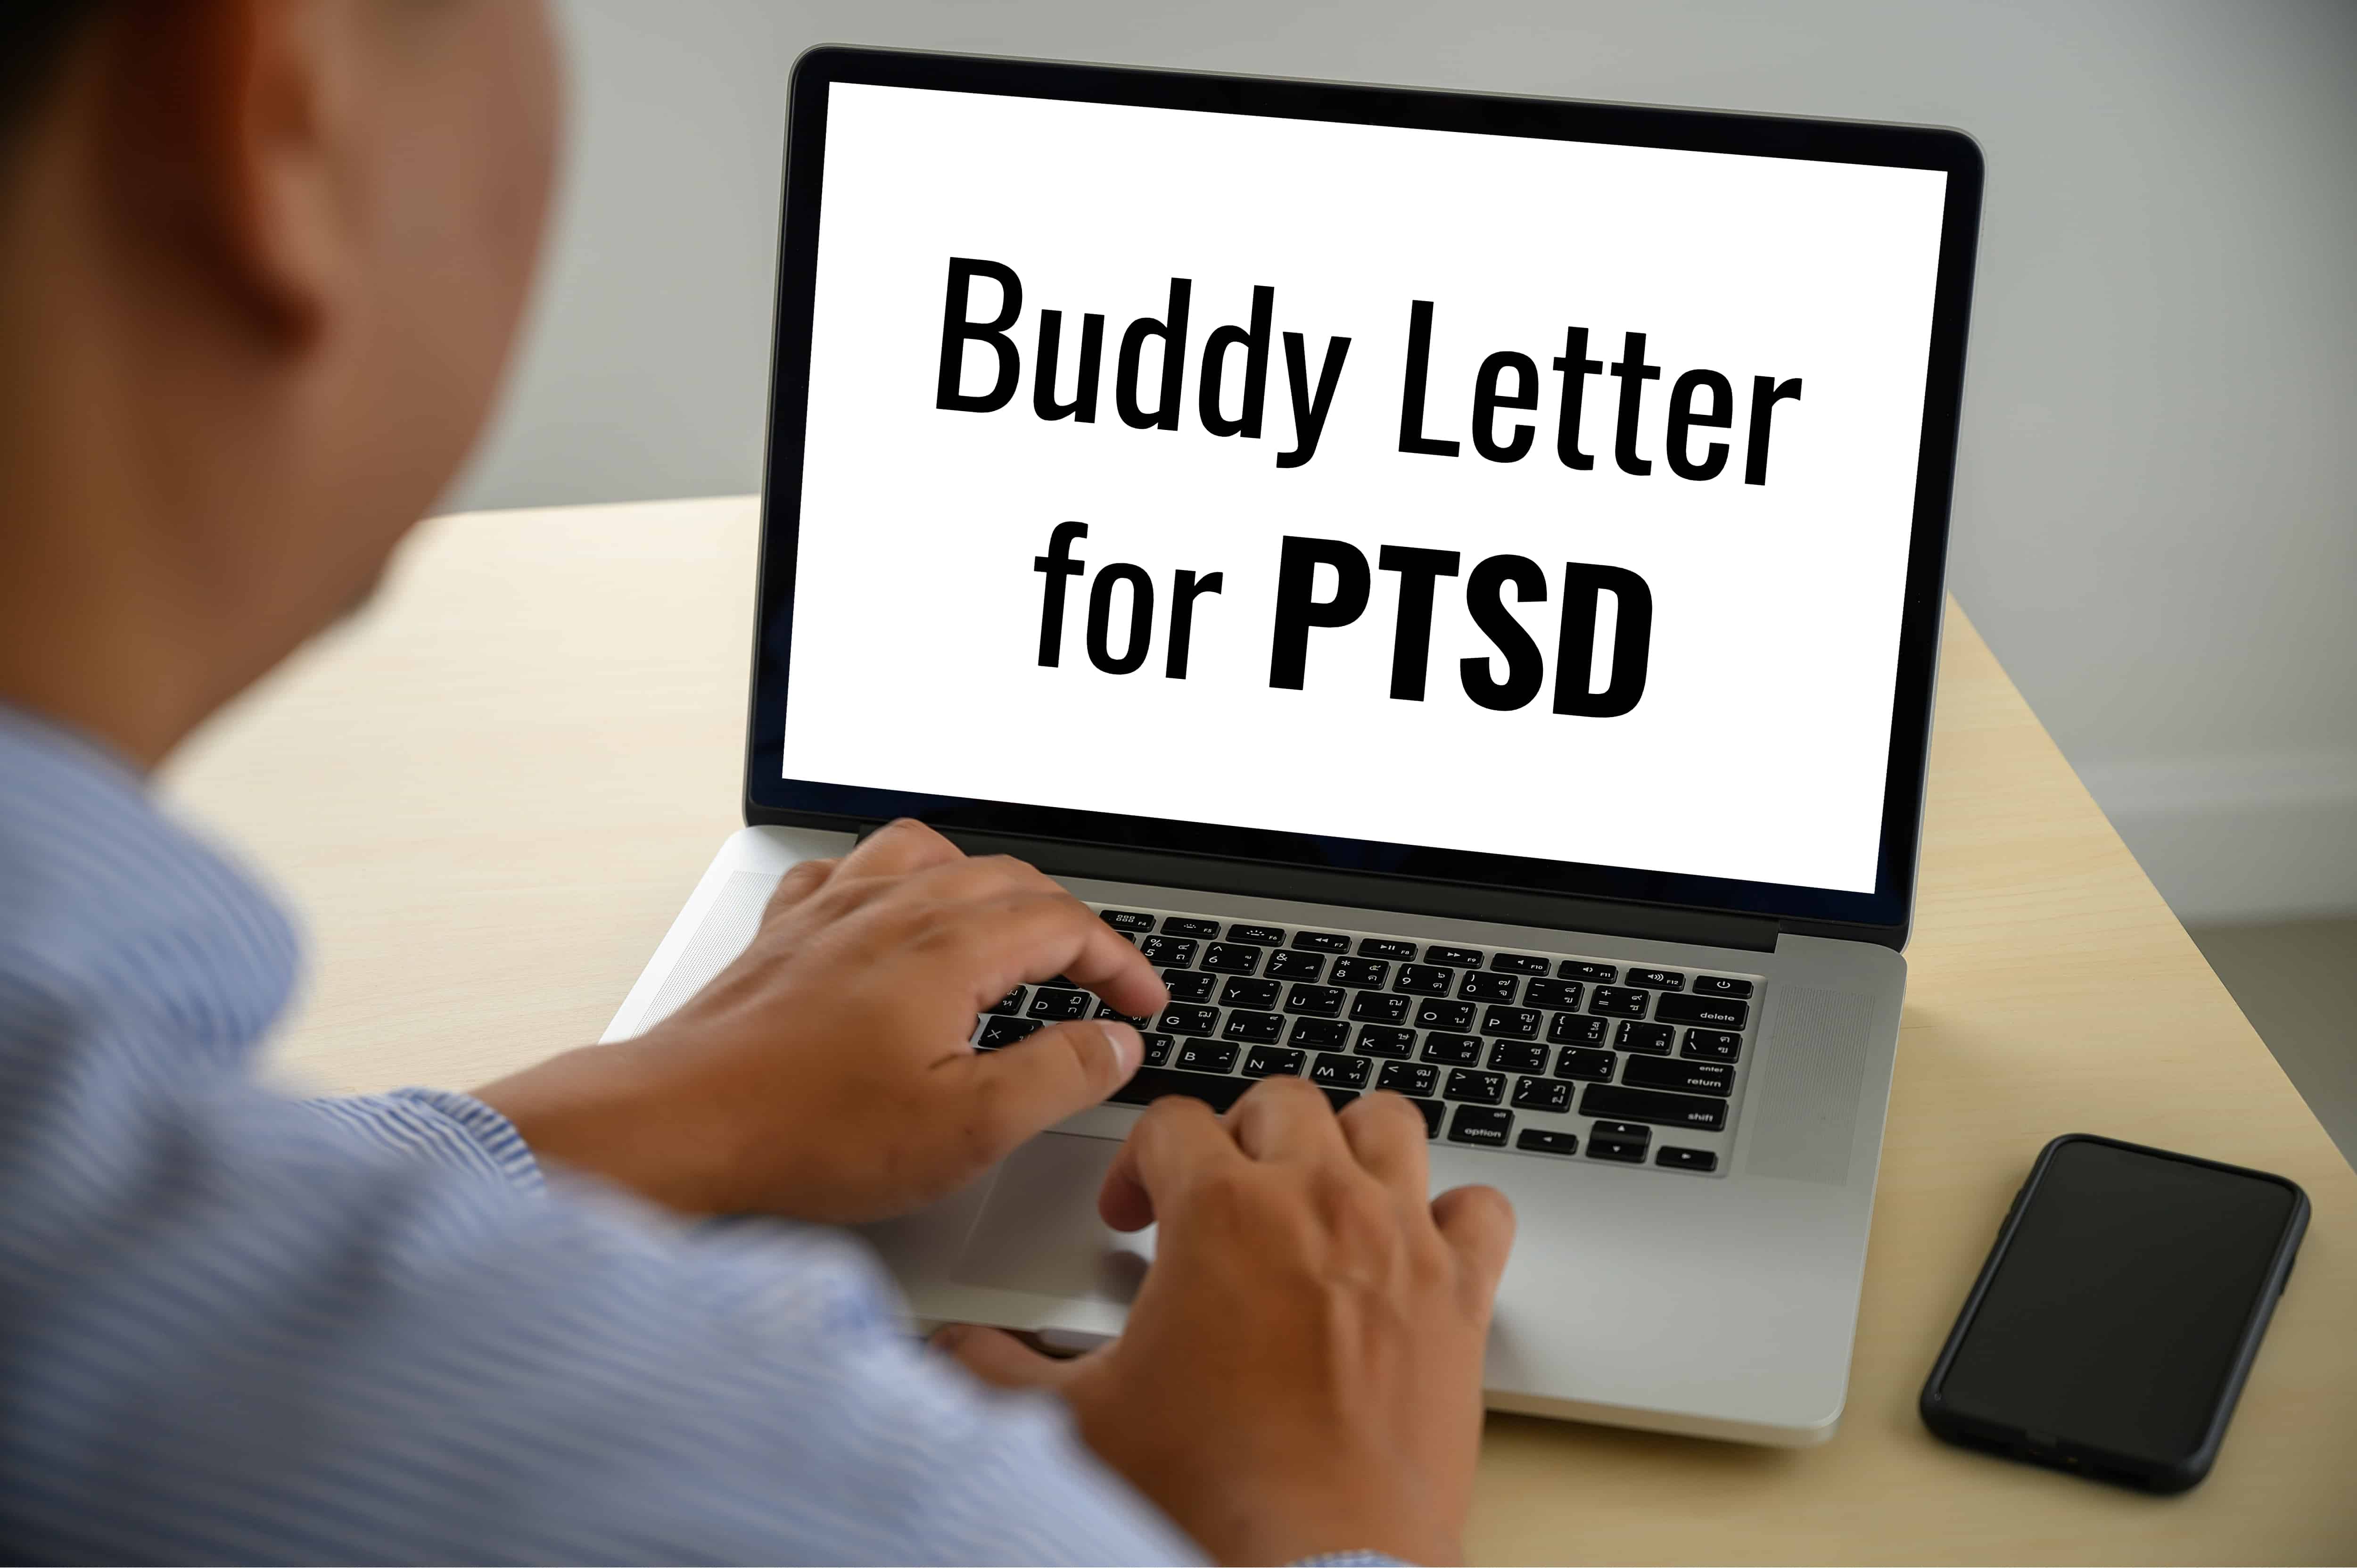 What is a Buddy Letter for PTSD? Buddy Letter for PTSD